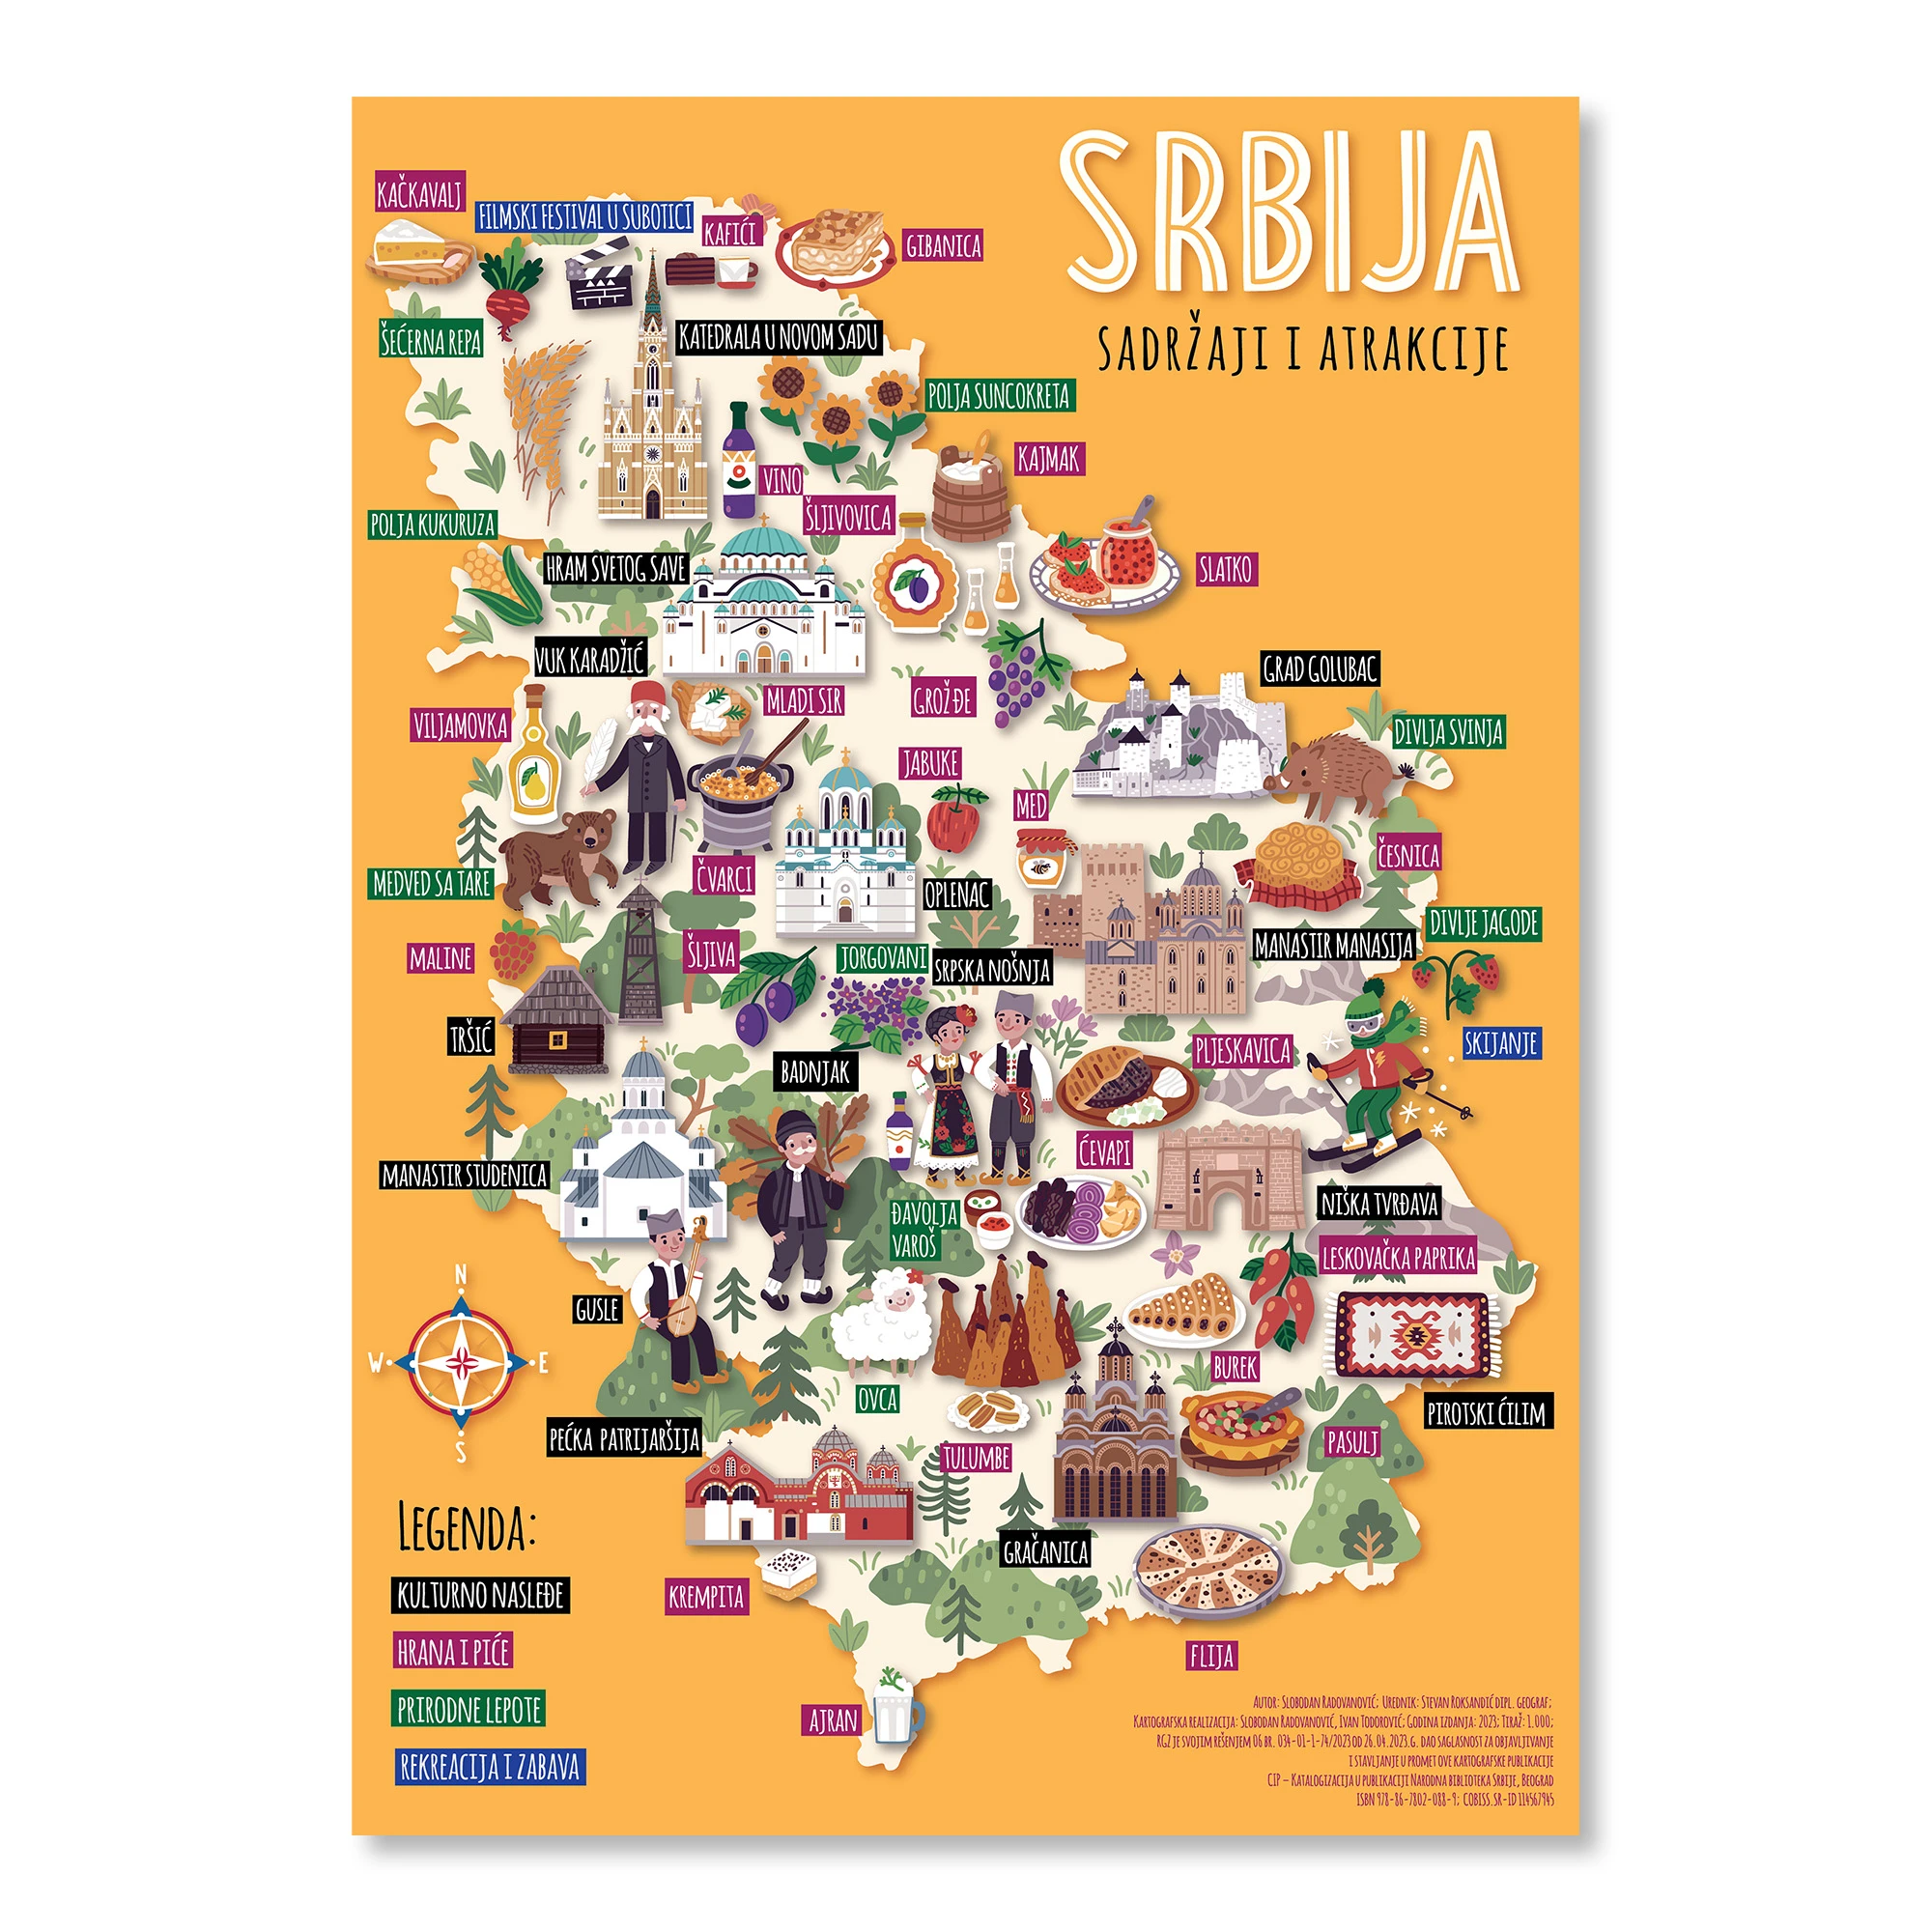 GREB-GREB PICTOGRAPHIC MAP OF SERBIA IN LATIN-4